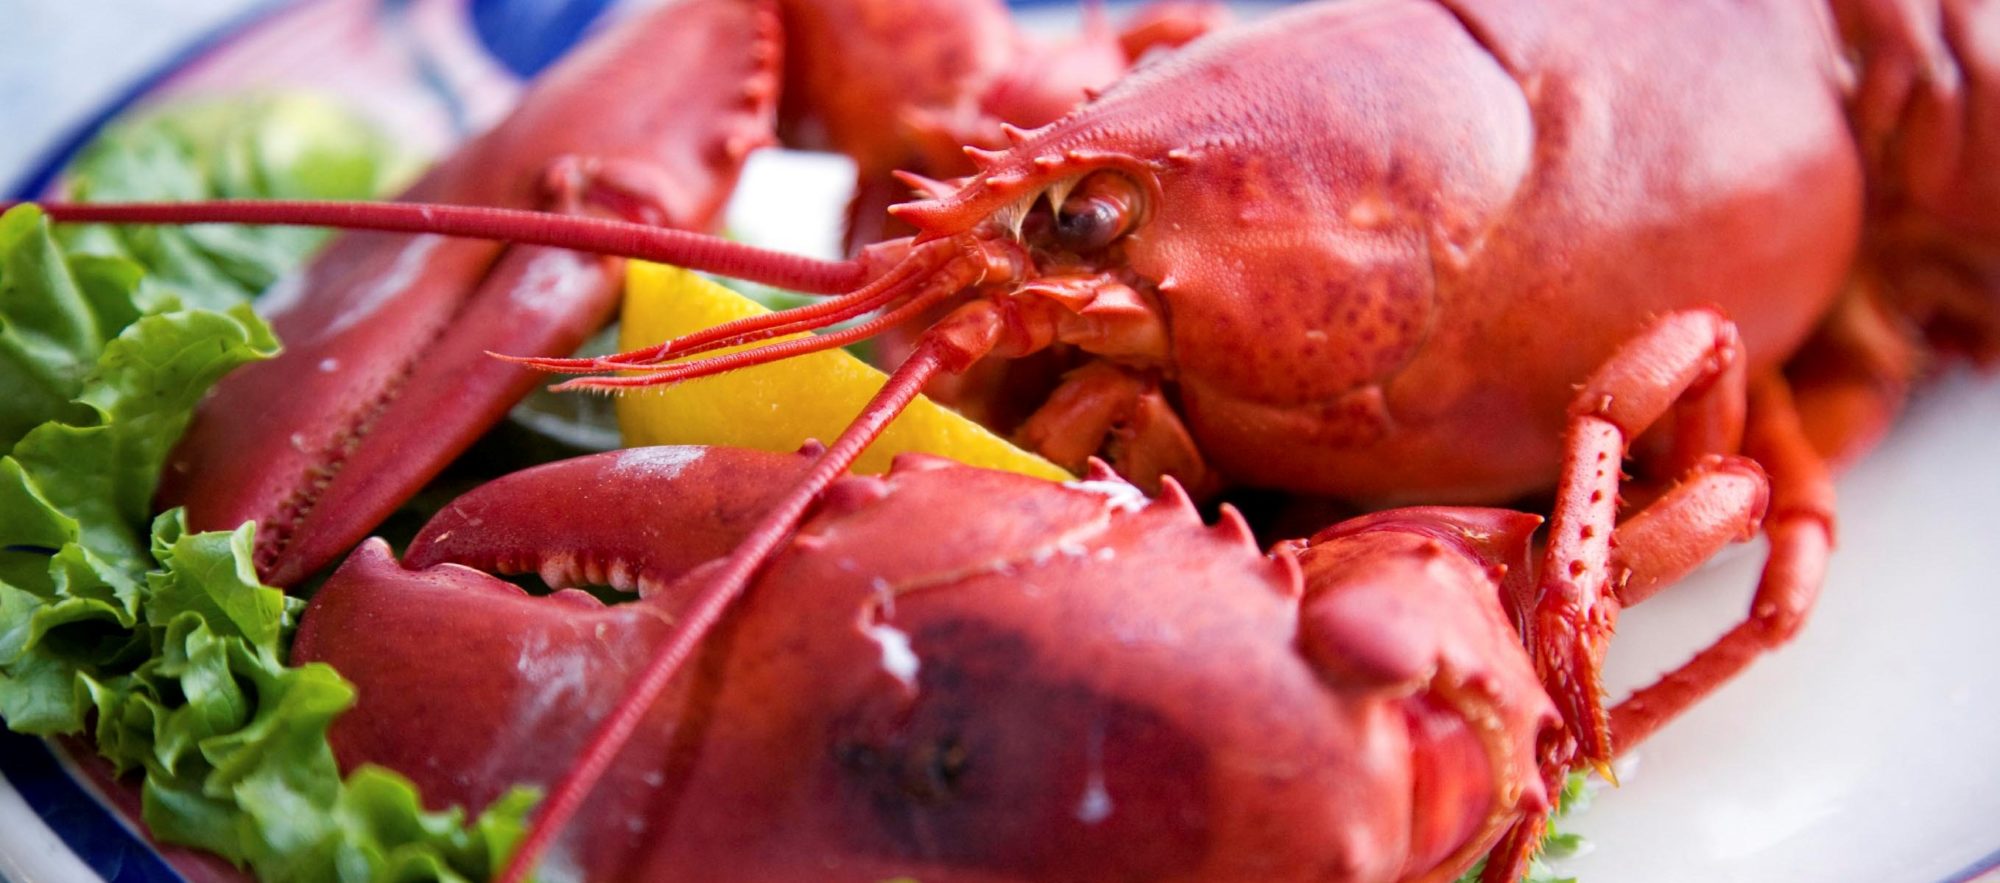 A lobster dinner with a wedge of lemon. Shallow DOF, focus on lobster's head.